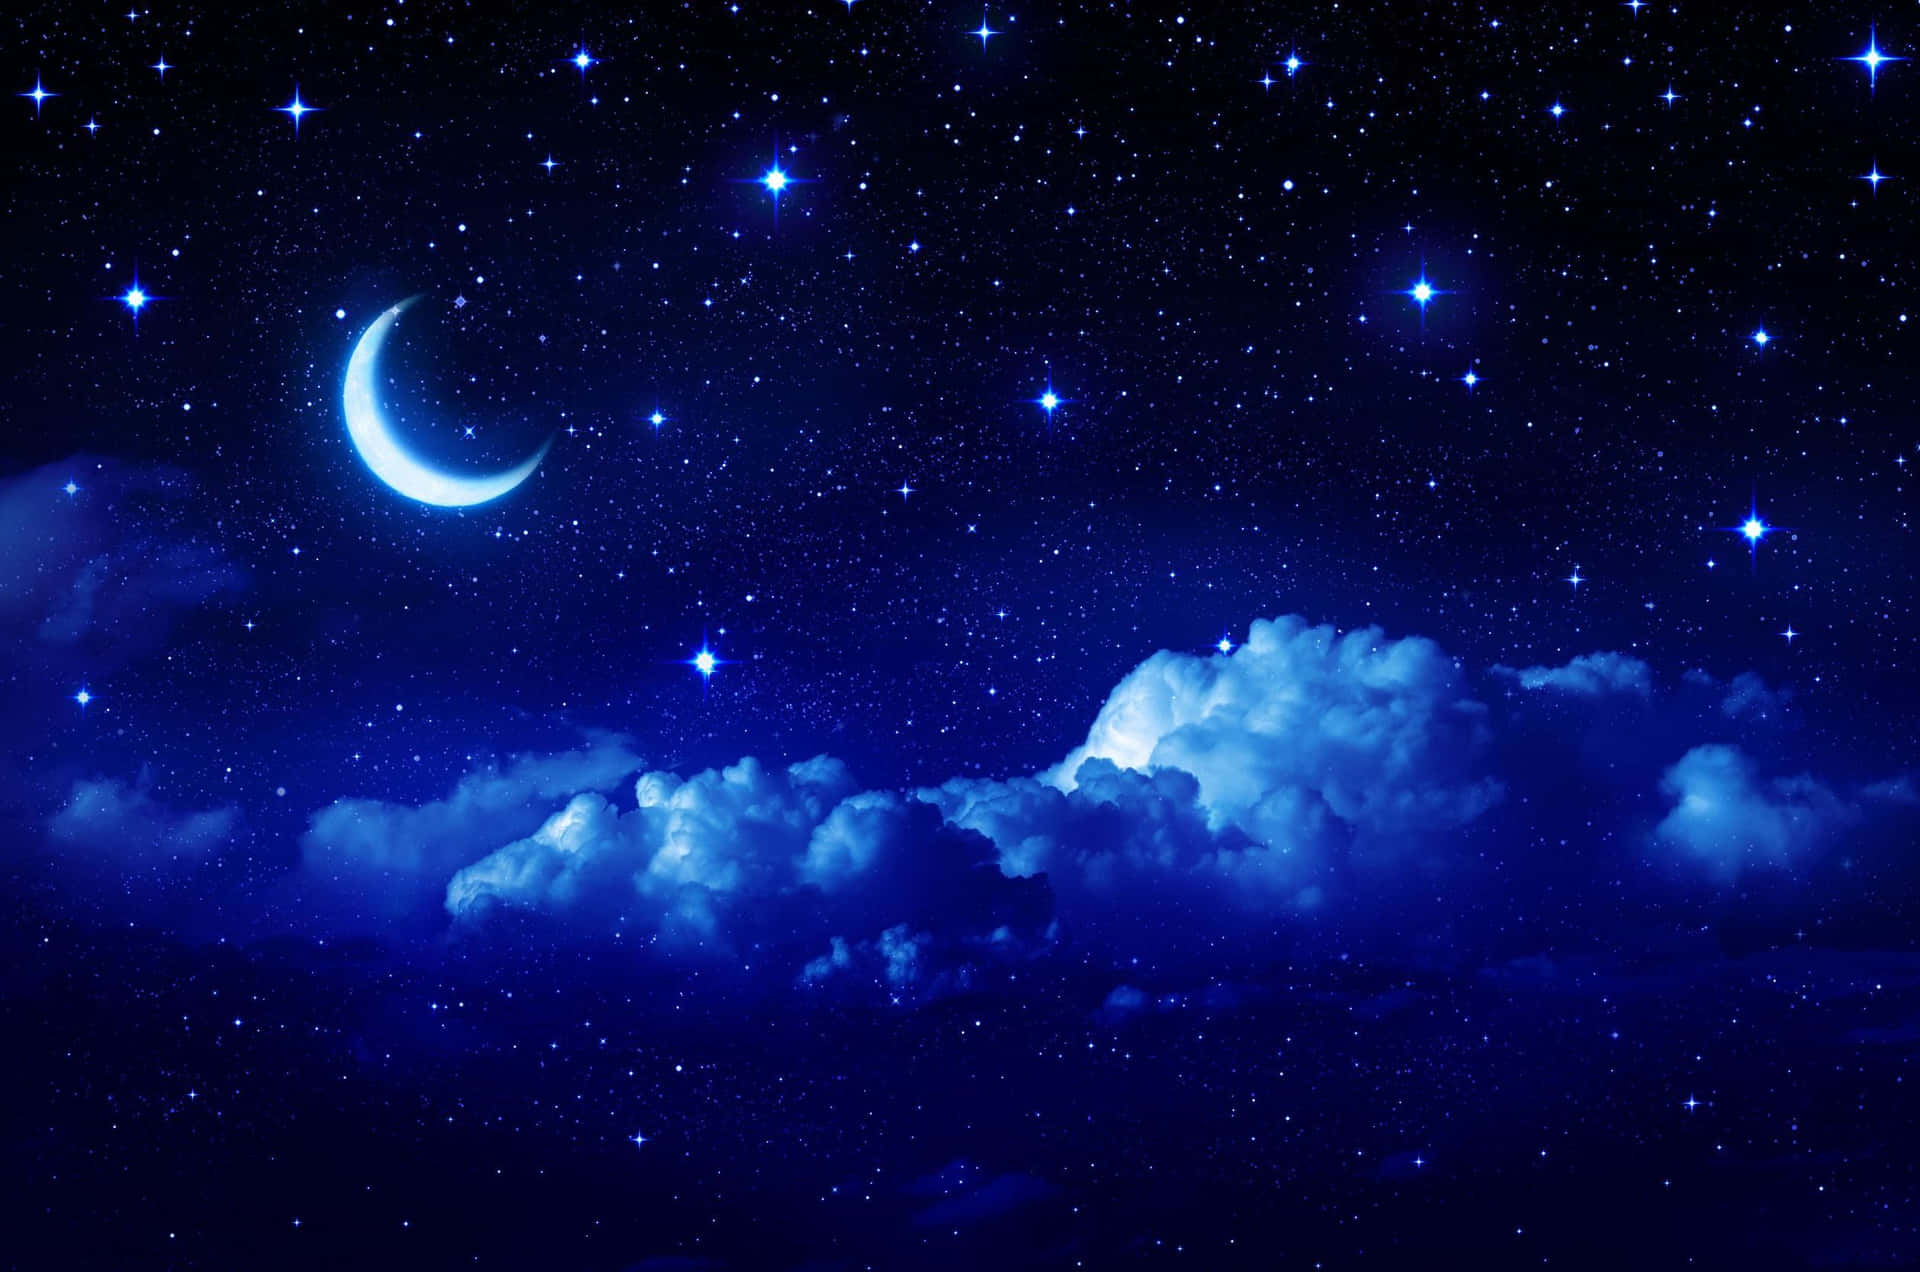 The beauty of the night sky with a sky full of glittering blue stars Wallpaper